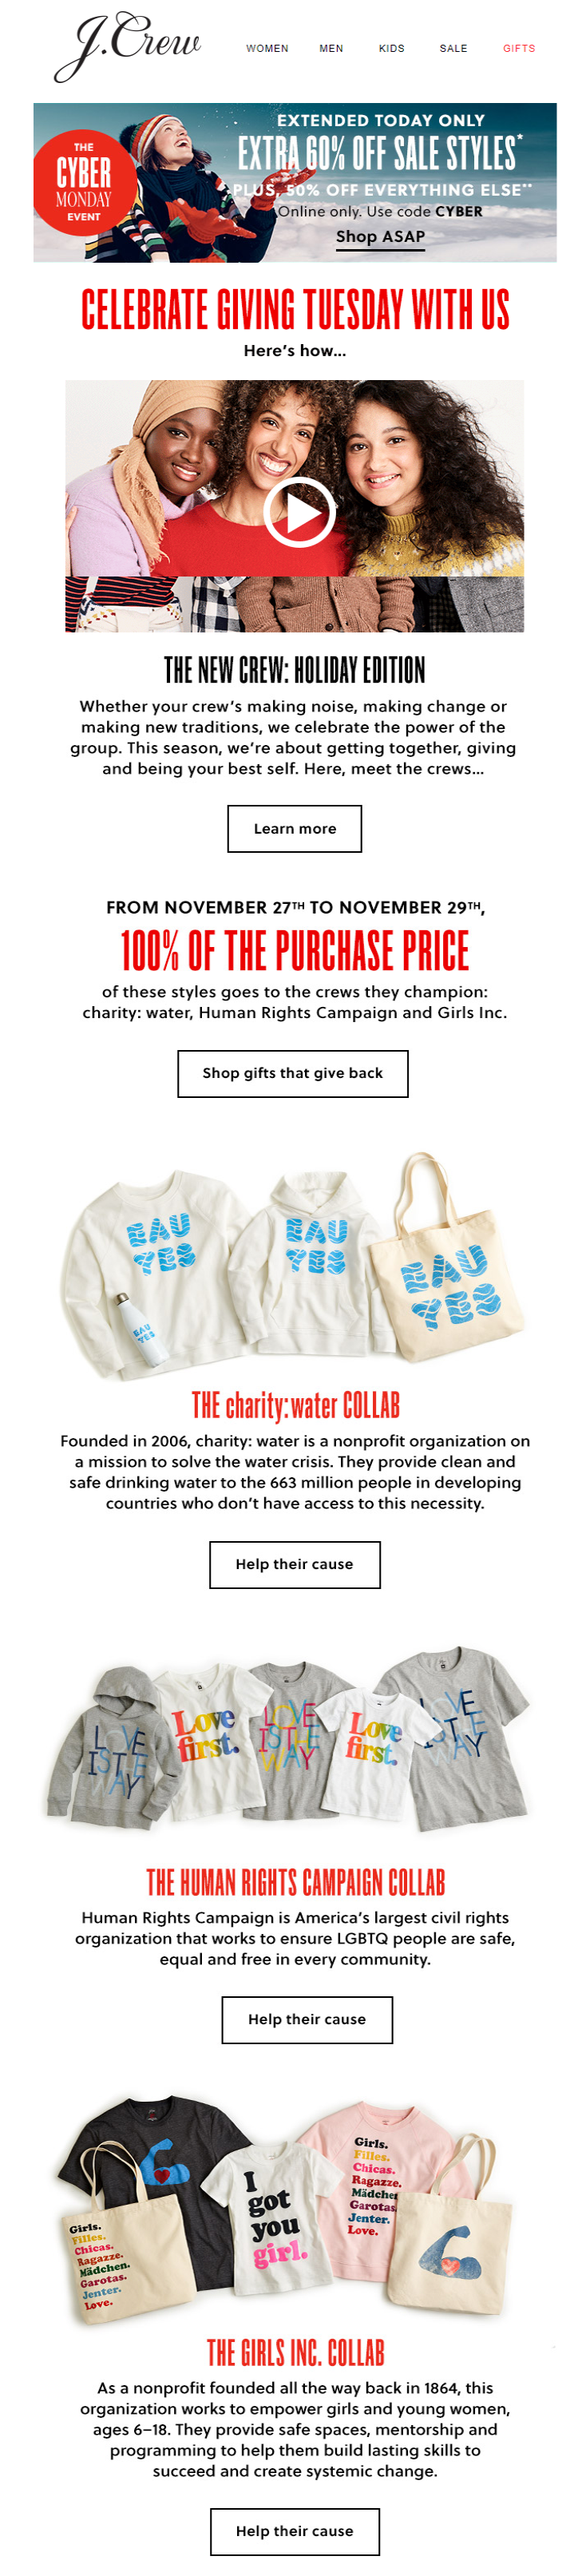 A Giving Tuesday email from J.Crew’s online store